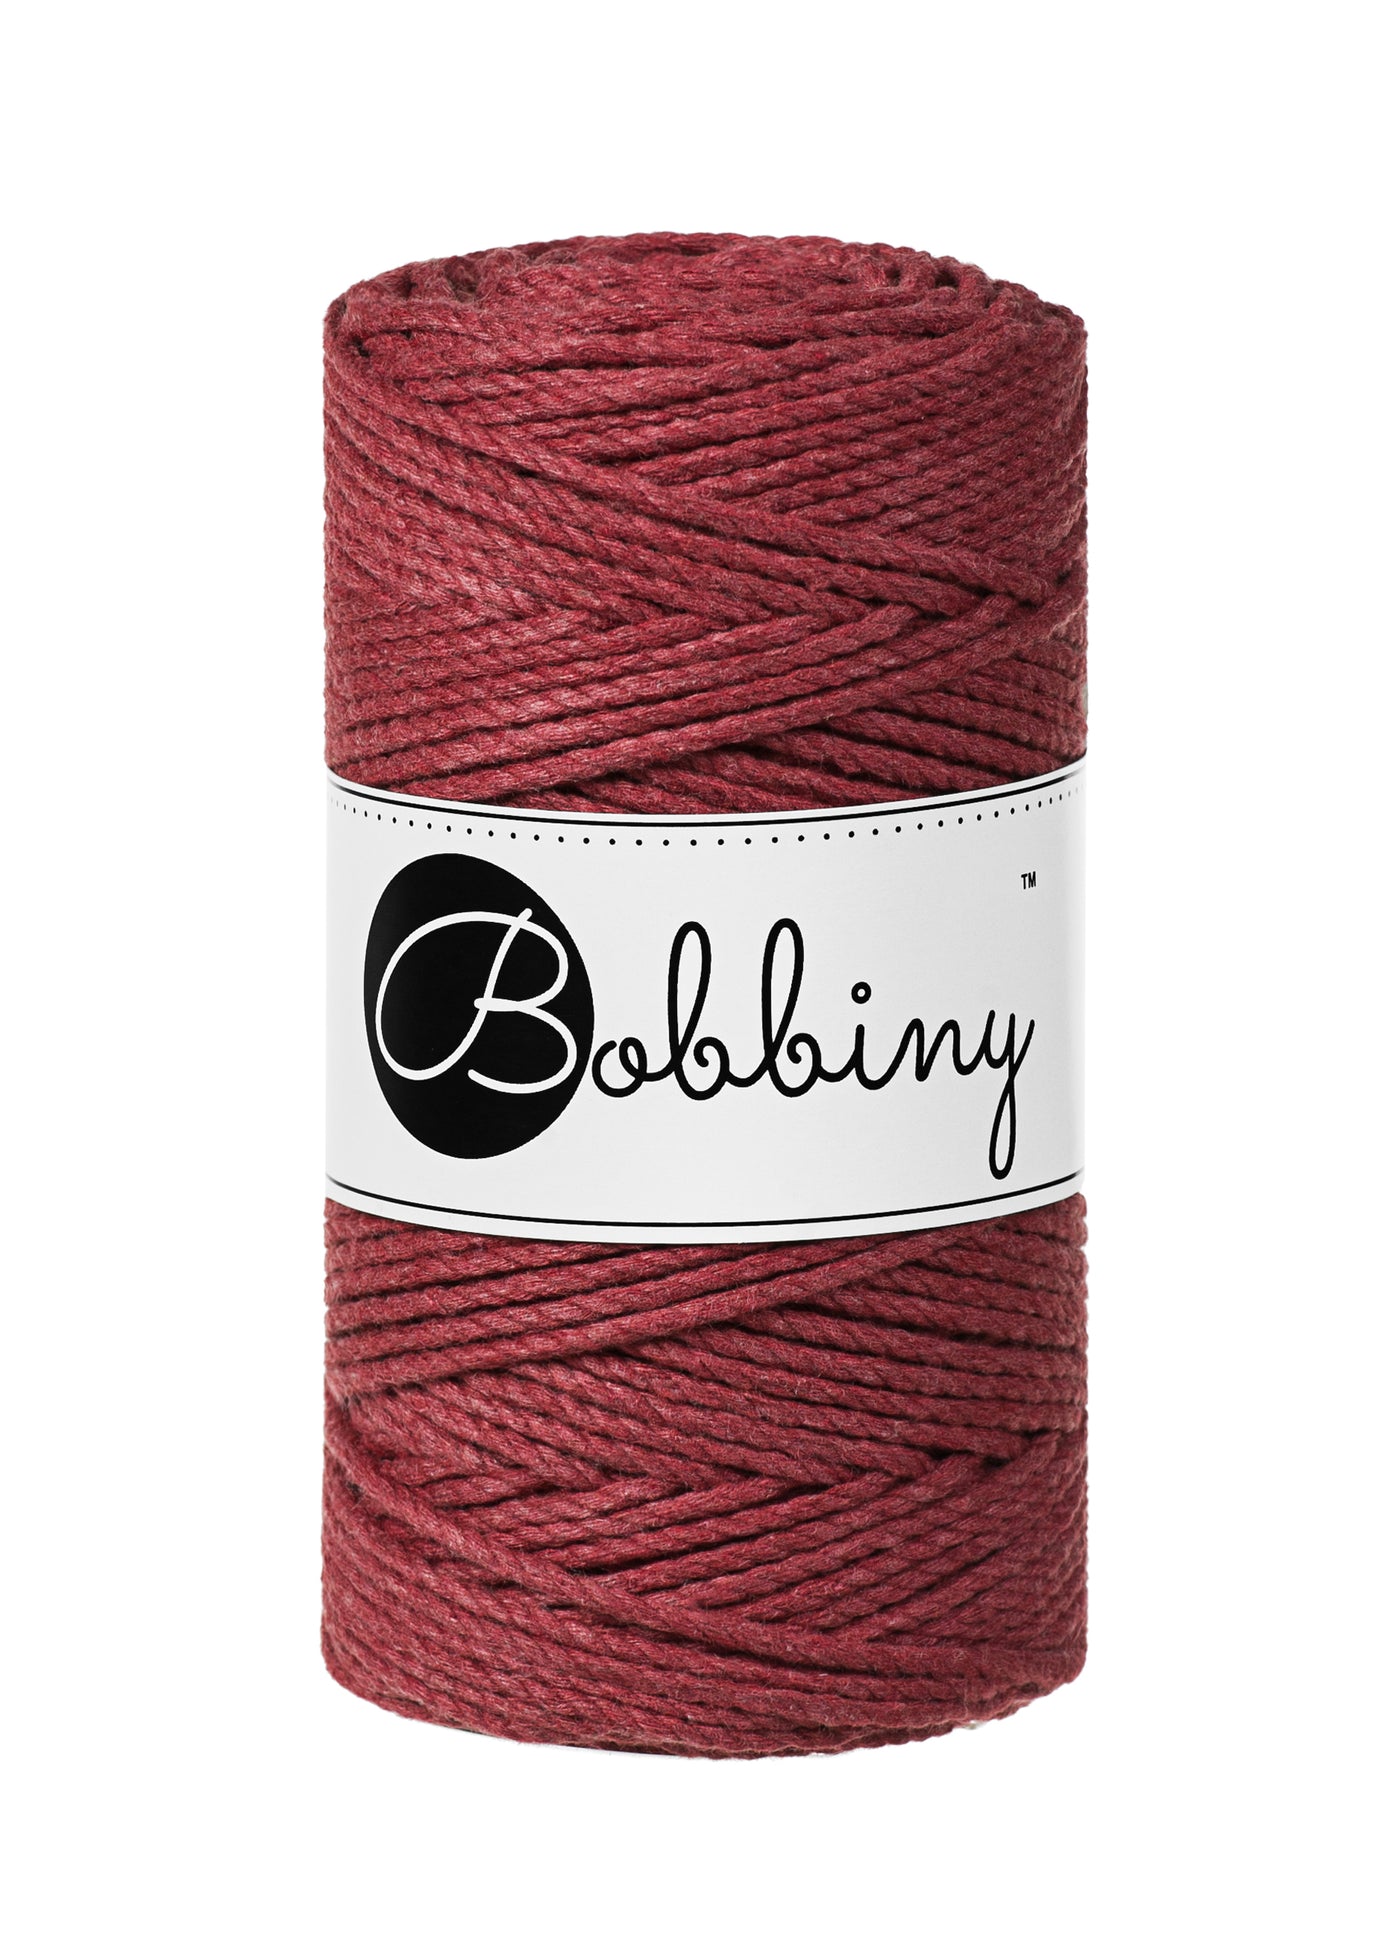 This superb new product from Bobbiny is the latest addition to their gorgeous range of products.  Made from 100% recycled cotton, it is perfect for Macrame projects due to its sturdiness. It contains no harmful dyes or chemicals and is OEKO-TEK certified.  This super soft triple twist rope also makes the most spectacular fringes and tassels.  Length: 100m (108 Yards)  Weight: 400gms  Contains 60 Fibres ( 3x20 )  Also available in 5mm